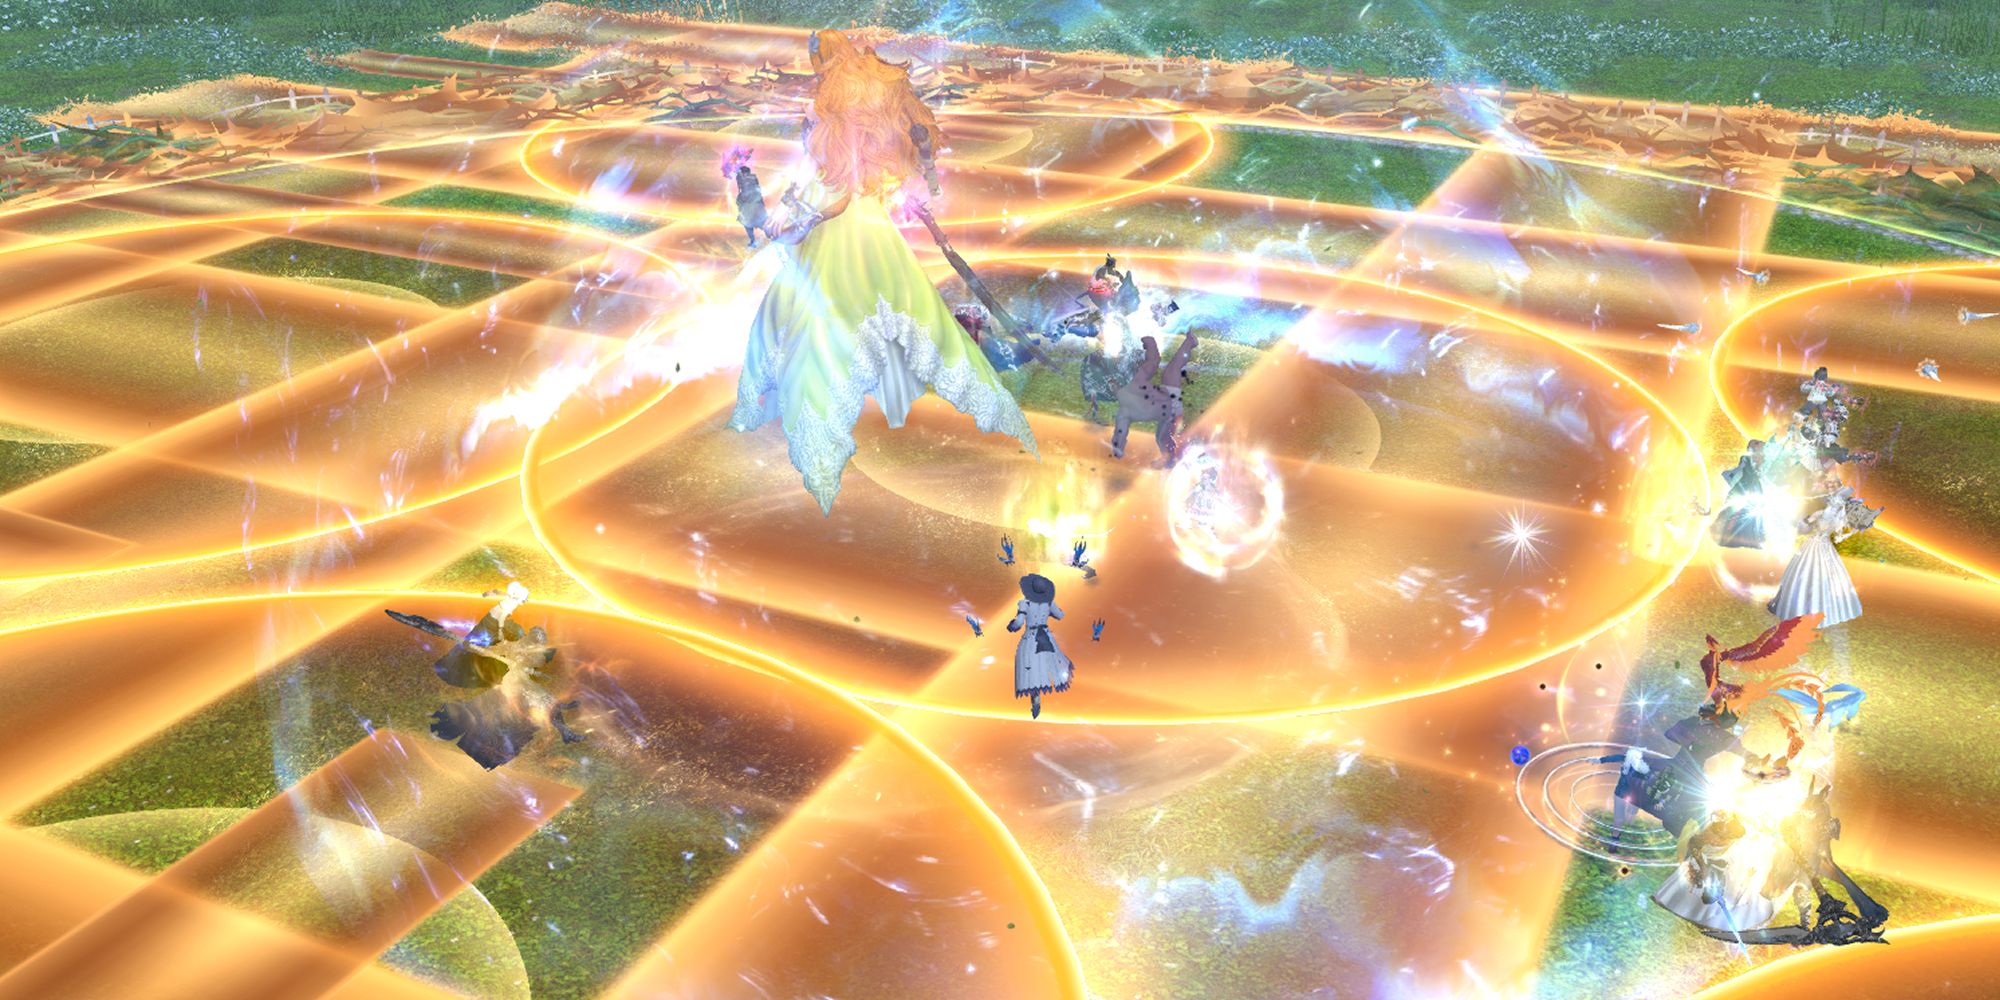 An image of the Euphrosyne Raid from FInal Fantasy 14, demonstrating Nophica's attack, Landwalker. Large danger zones cross the battlefield, interspersed with wide circle areas.